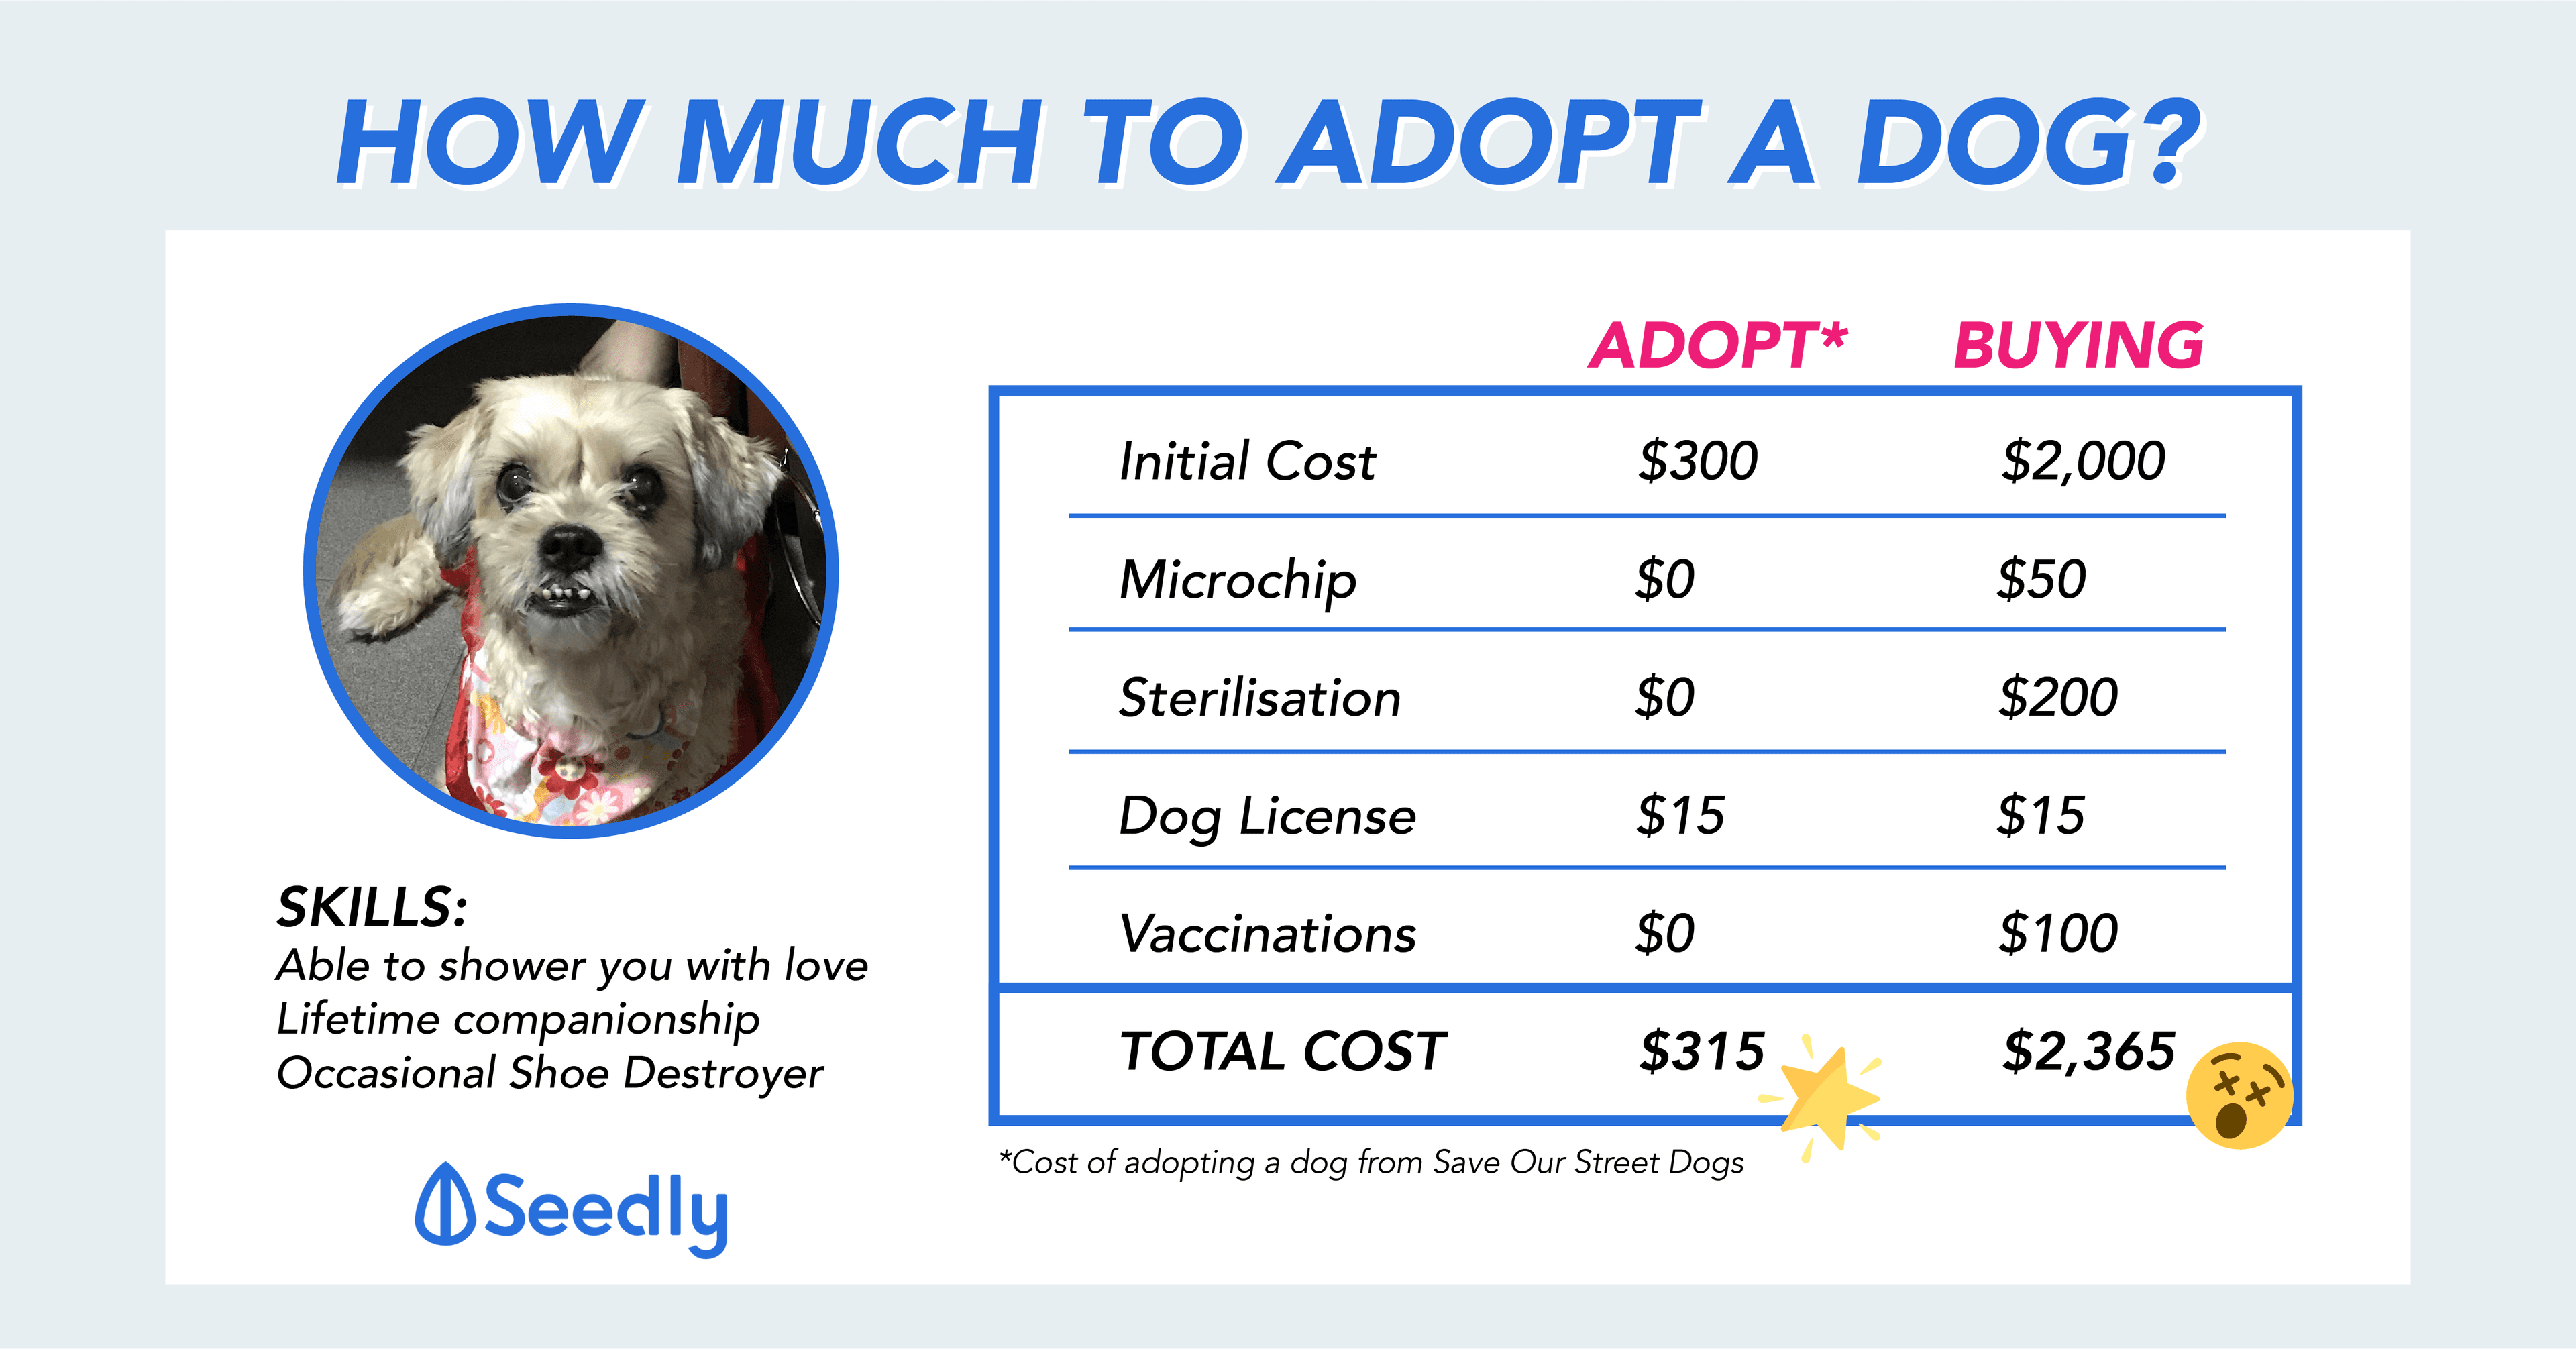 Save Almost $2,000 When You Choose To Adopt Instead Of Buying A Pet Dog In Singapore